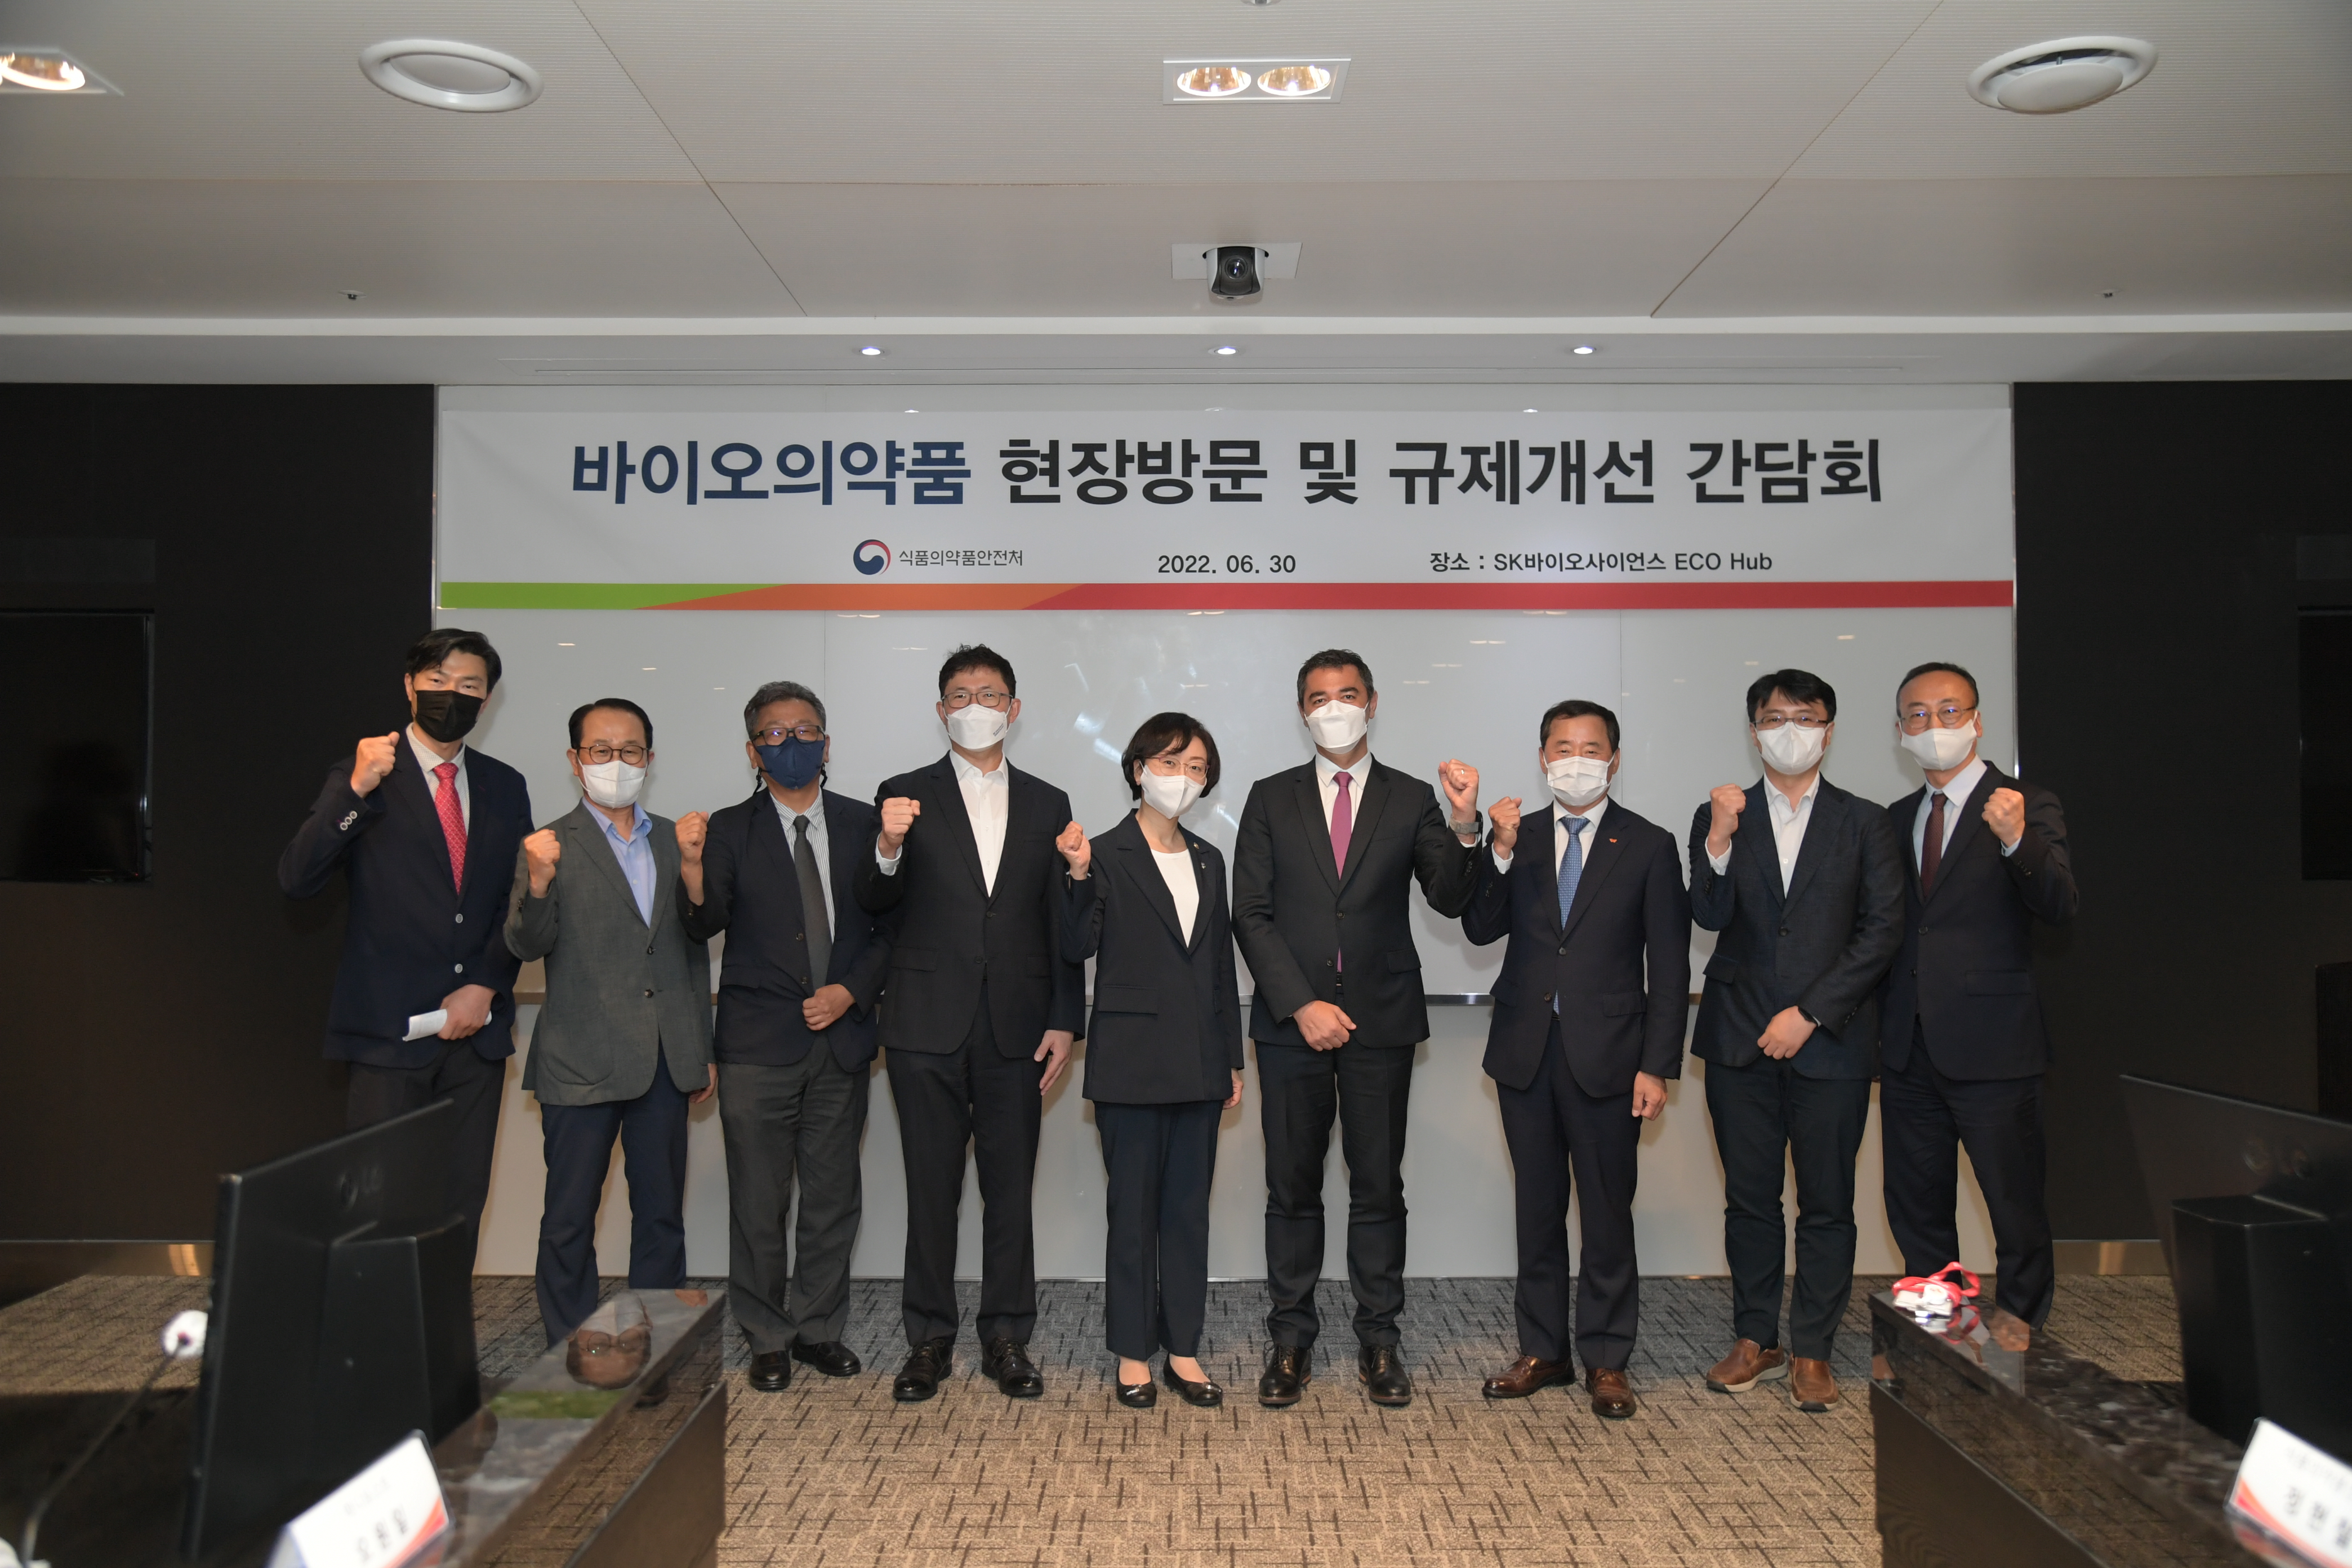 Photo News5 - [June 30, 2022] Minister Visits Medical Product Manufacturing Site